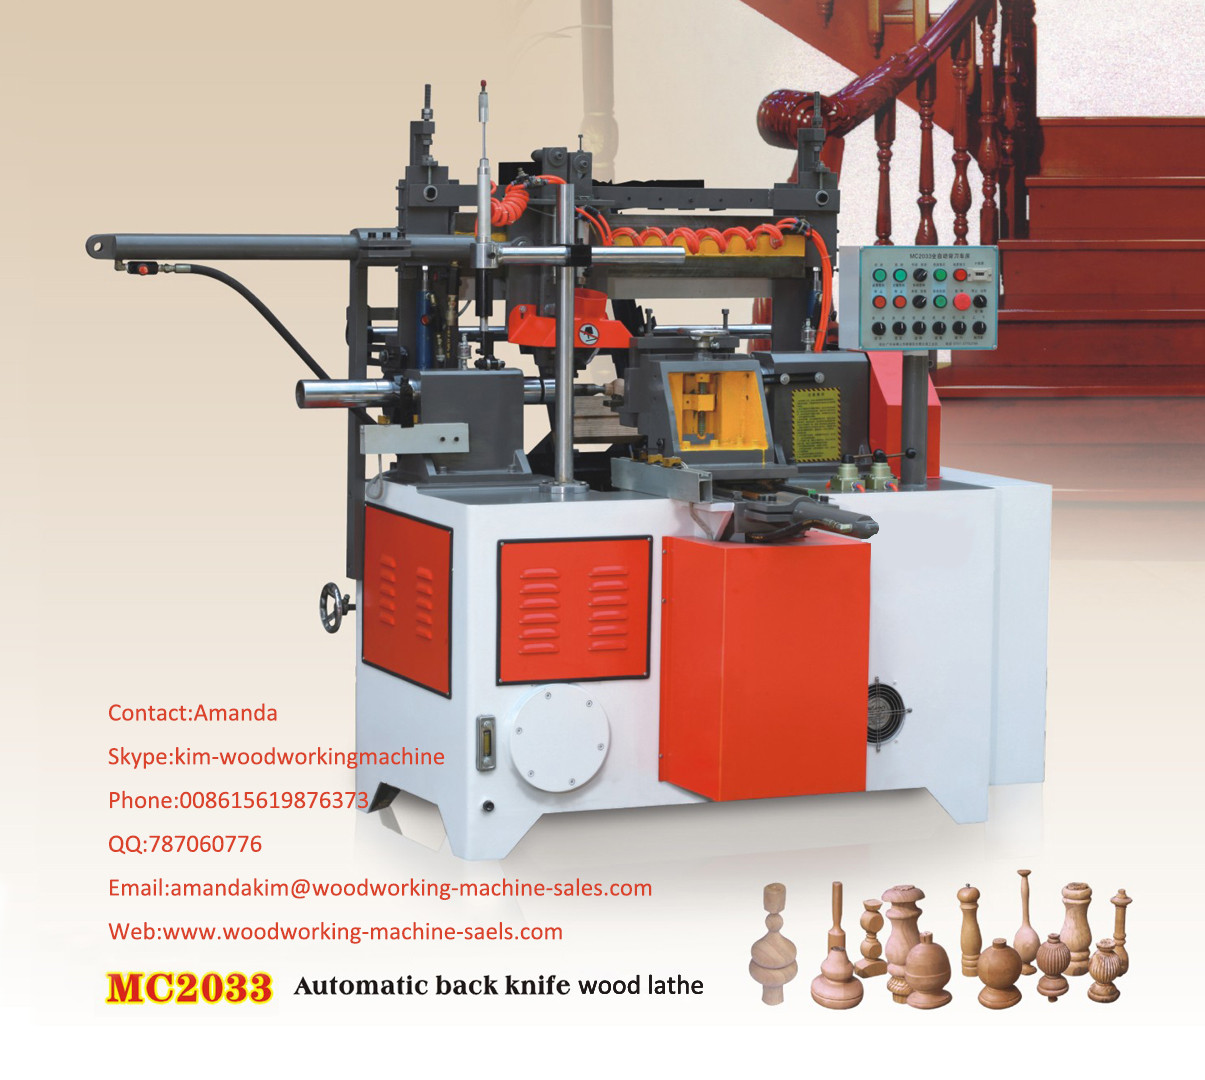 MC2033 Automatic back knife wood lathe for small comoponents